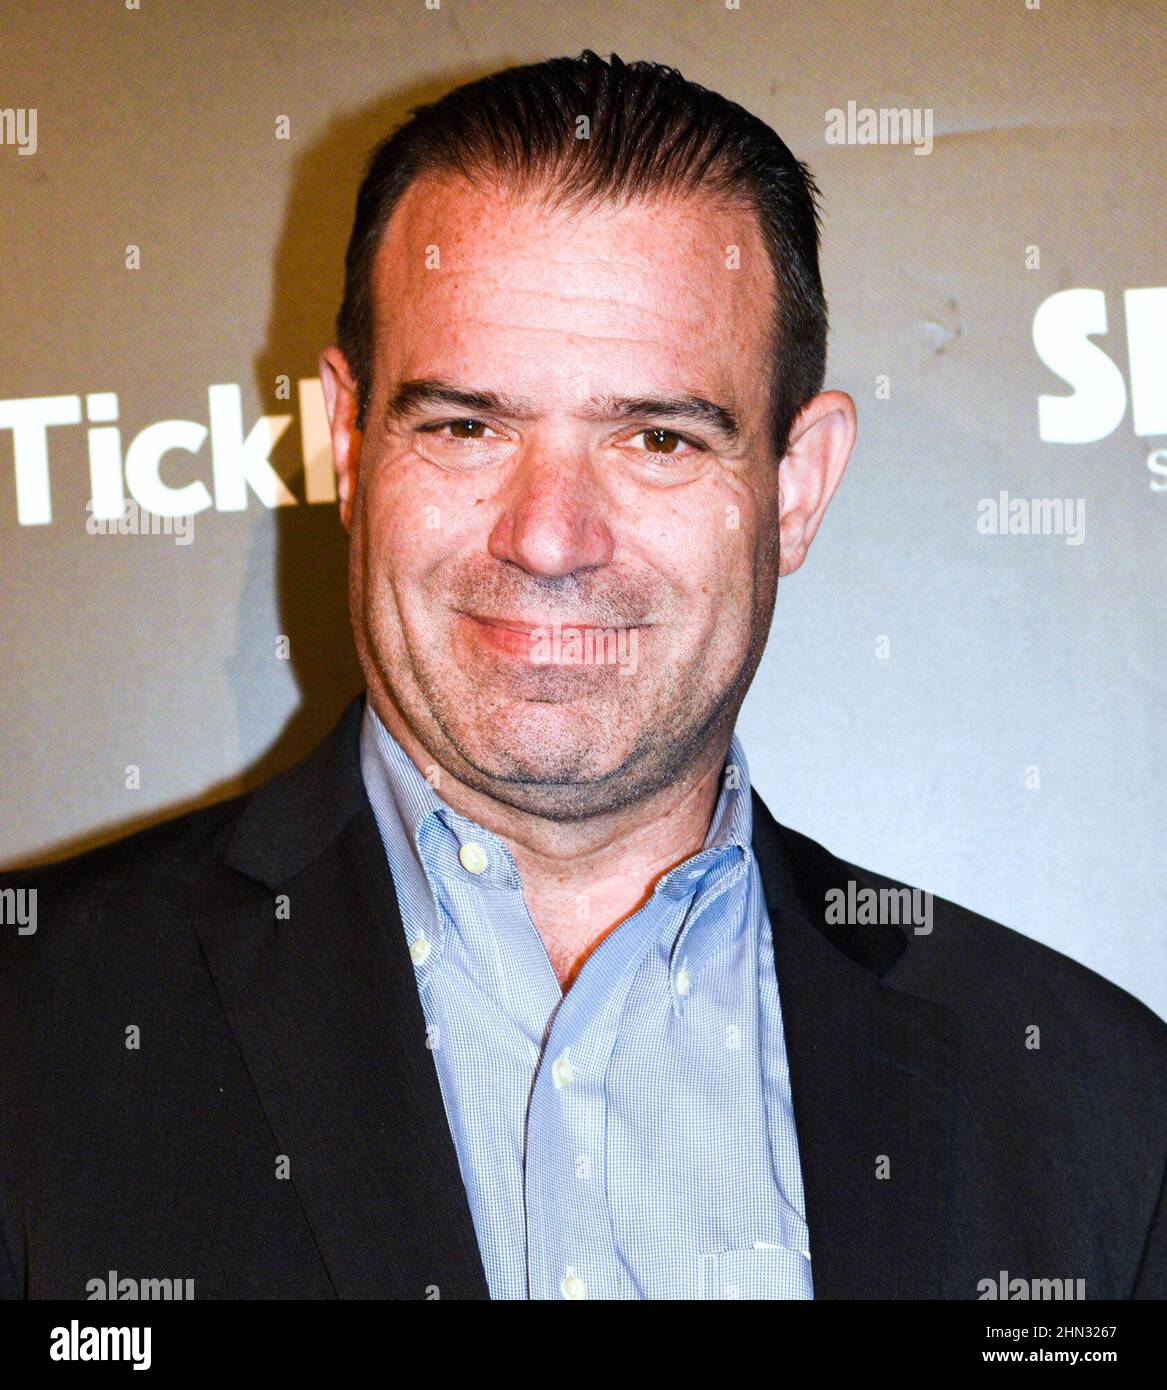 https://c8.alamy.com/comp/2HN3267/los-angeles-usa-12th-feb-2022-mike-dempsey-attends-the-directv-presents-maxim-electric-nights-at-city-market-on-february-12-2022-in-los-angeles-california-photo-annie-lesserimagespace-credit-imagespacealamy-live-news-2HN3267.jpg